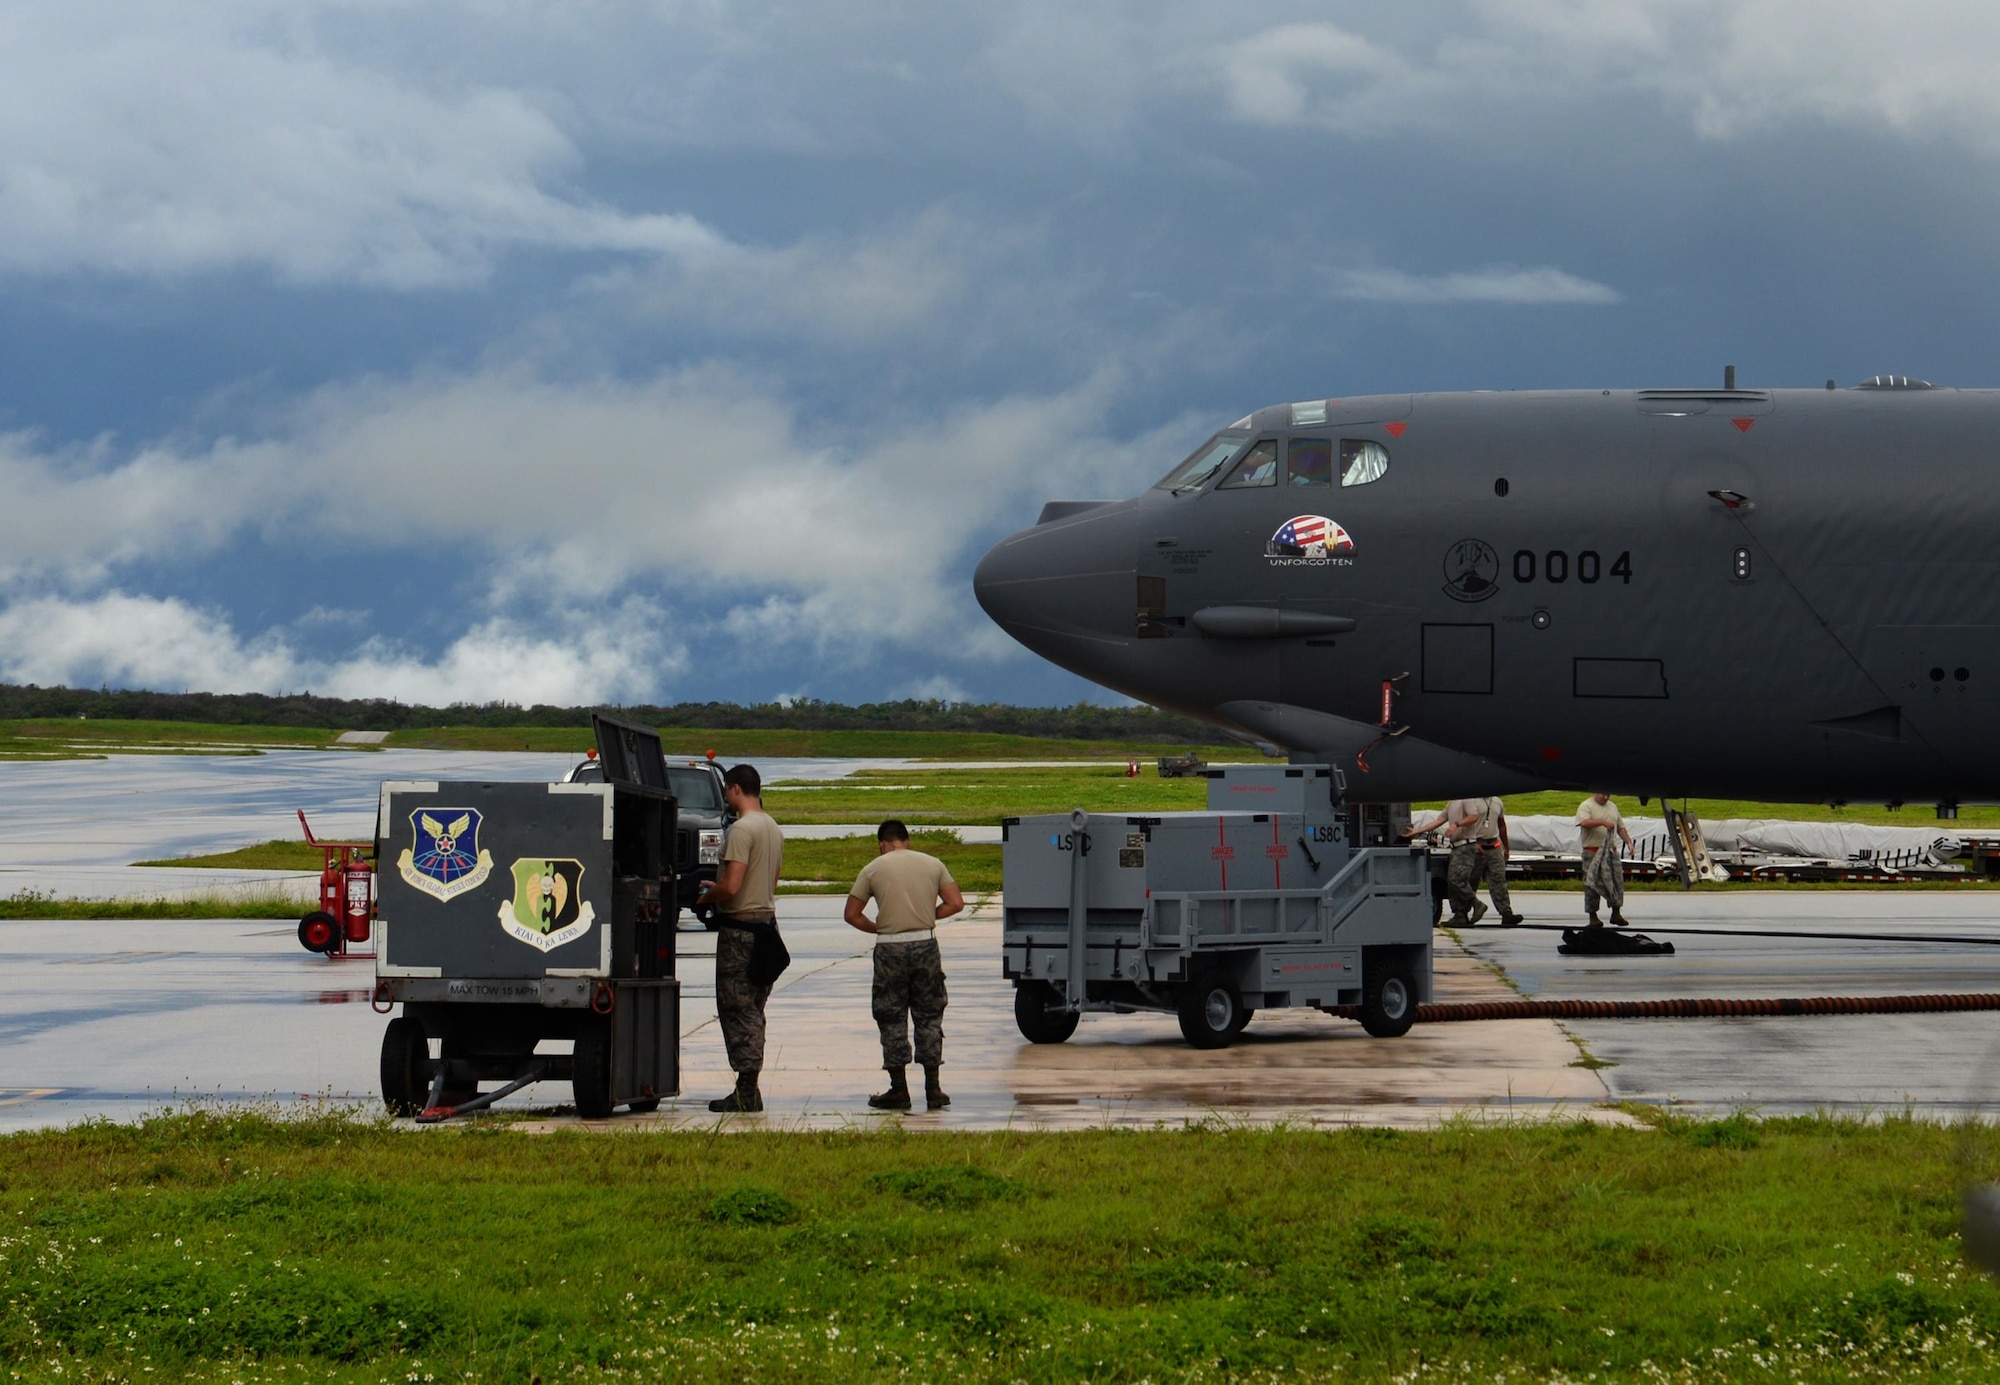 Members of the 36th Expeditionary Aircraft Maintenance Squadron participate in a munitions loading exercise July 13, 2016, at Andersen Air Force Base, Guam. The exercise tested their ability to quickly and safely load a B-52H Stratofortress with munitions, which is integral to provide combat-ready aircraft in support of U.S. Pacific Command’s continuous bomber presence mission. (U.S. Air Force photo by Airman 1st Class Alexa Ann Henderson/Released)